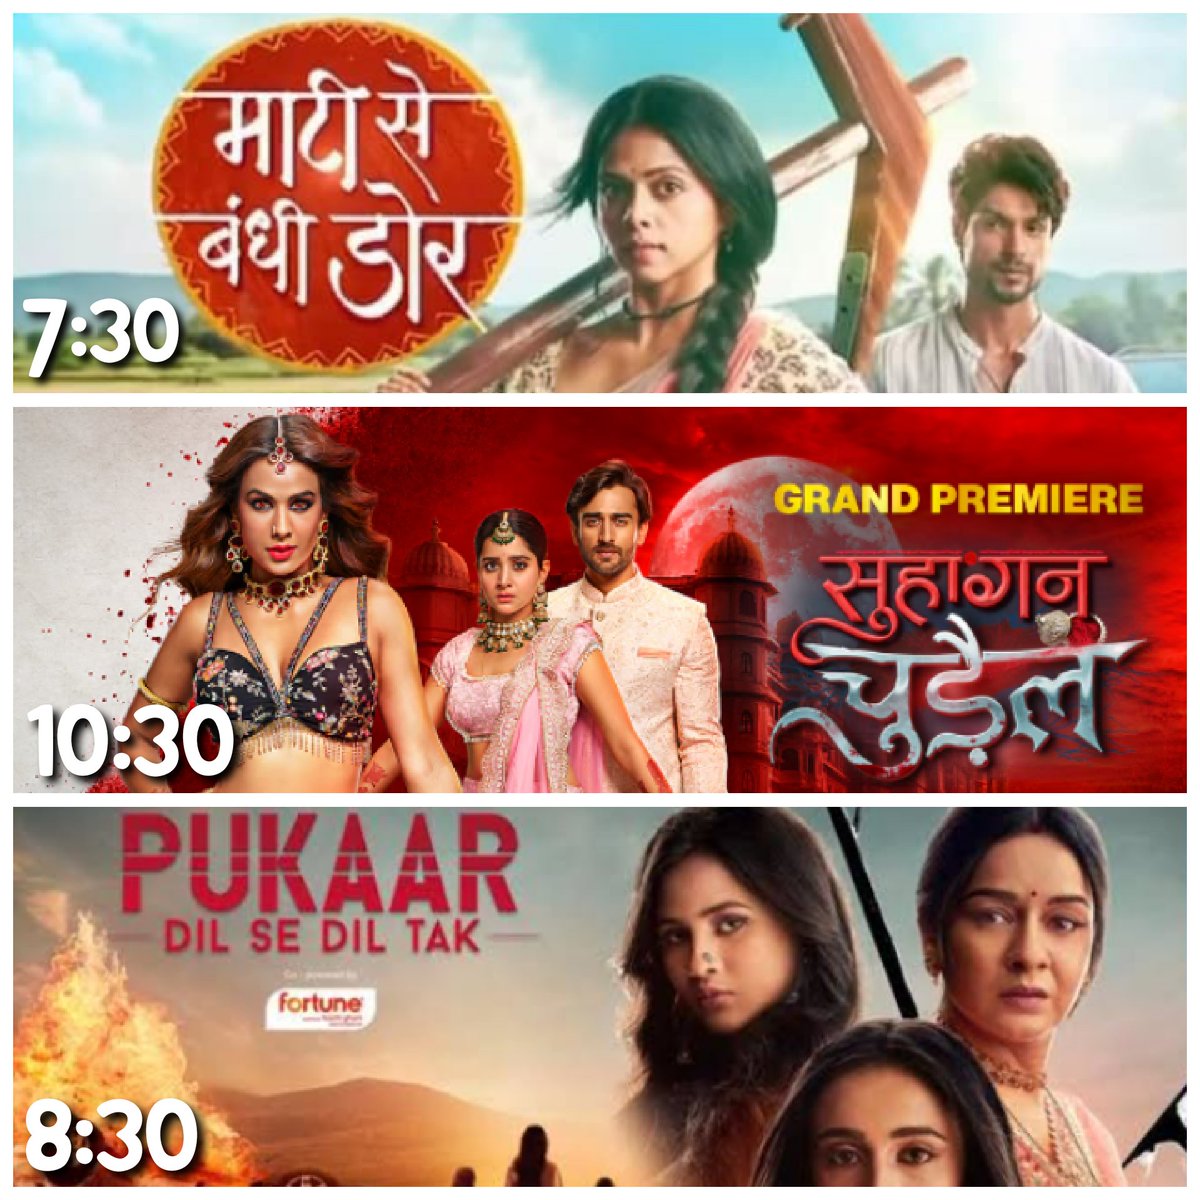 #Starswithprince 🗞️

Don't Forget to Watch these New Shows on Today Onwards !! 🍿
• #Maatisebandhidor at 7:30 in #Starplus !!
• #Suhaganchudail at 10:30 in #Colors !!
• #Pukaar Dil se Dil Tak at 8:30 in #Sonytv !!